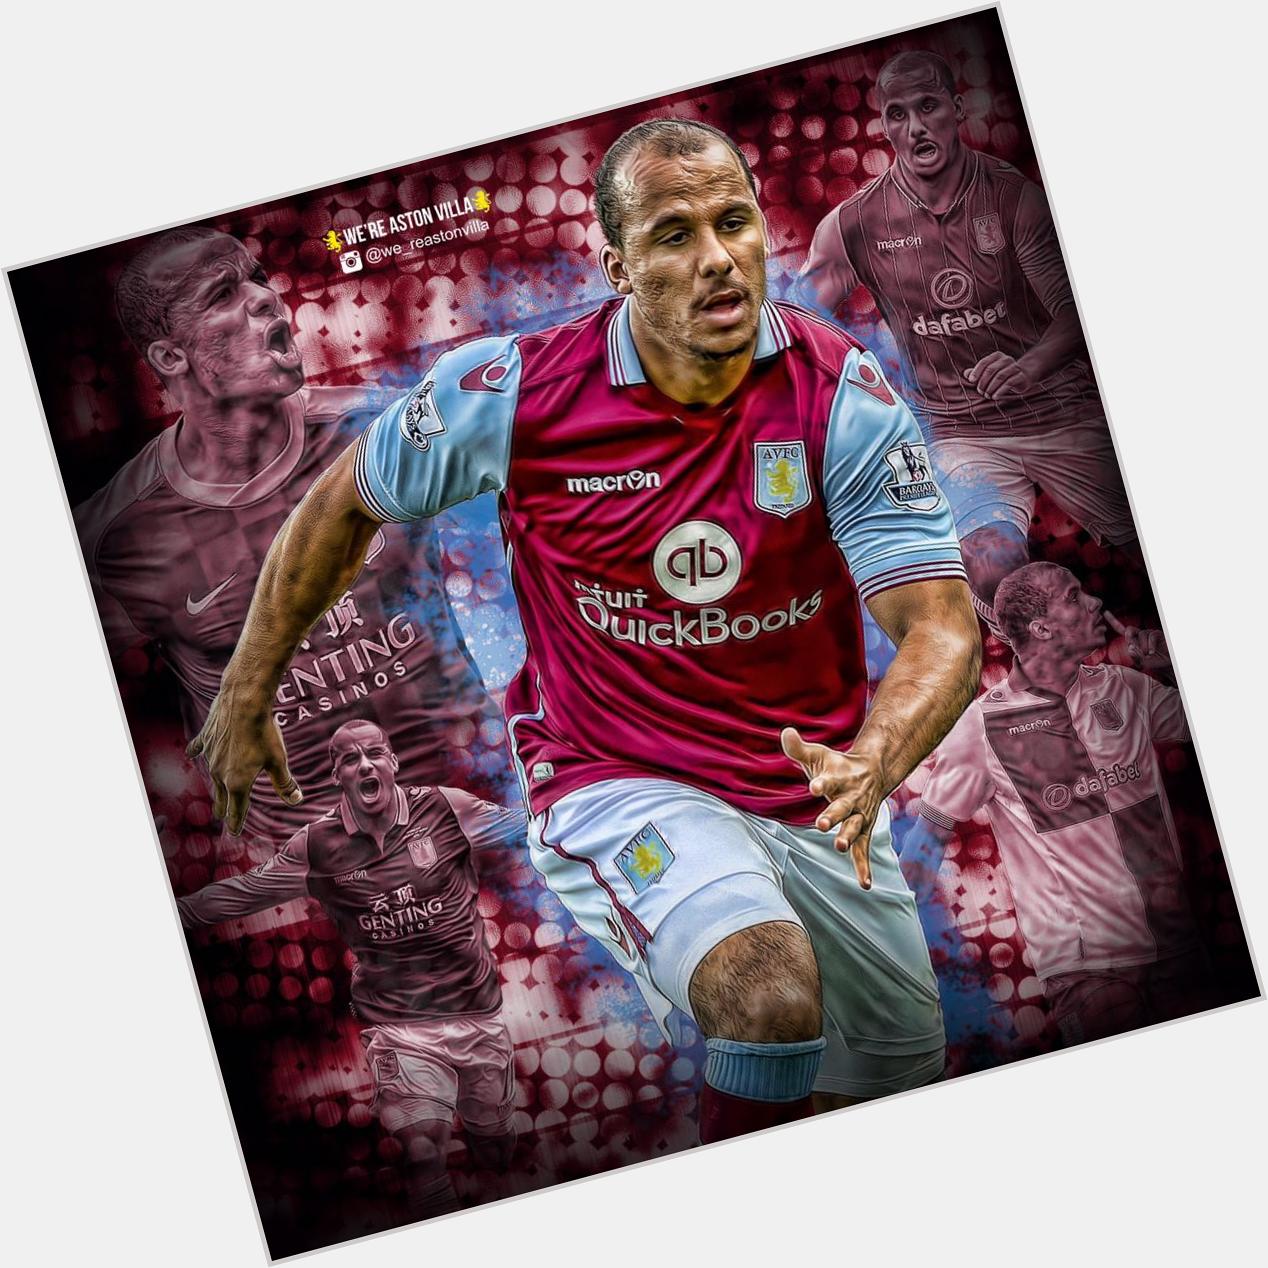 Happy birthday to Gabriel Agbonlahor who turns 29 today  